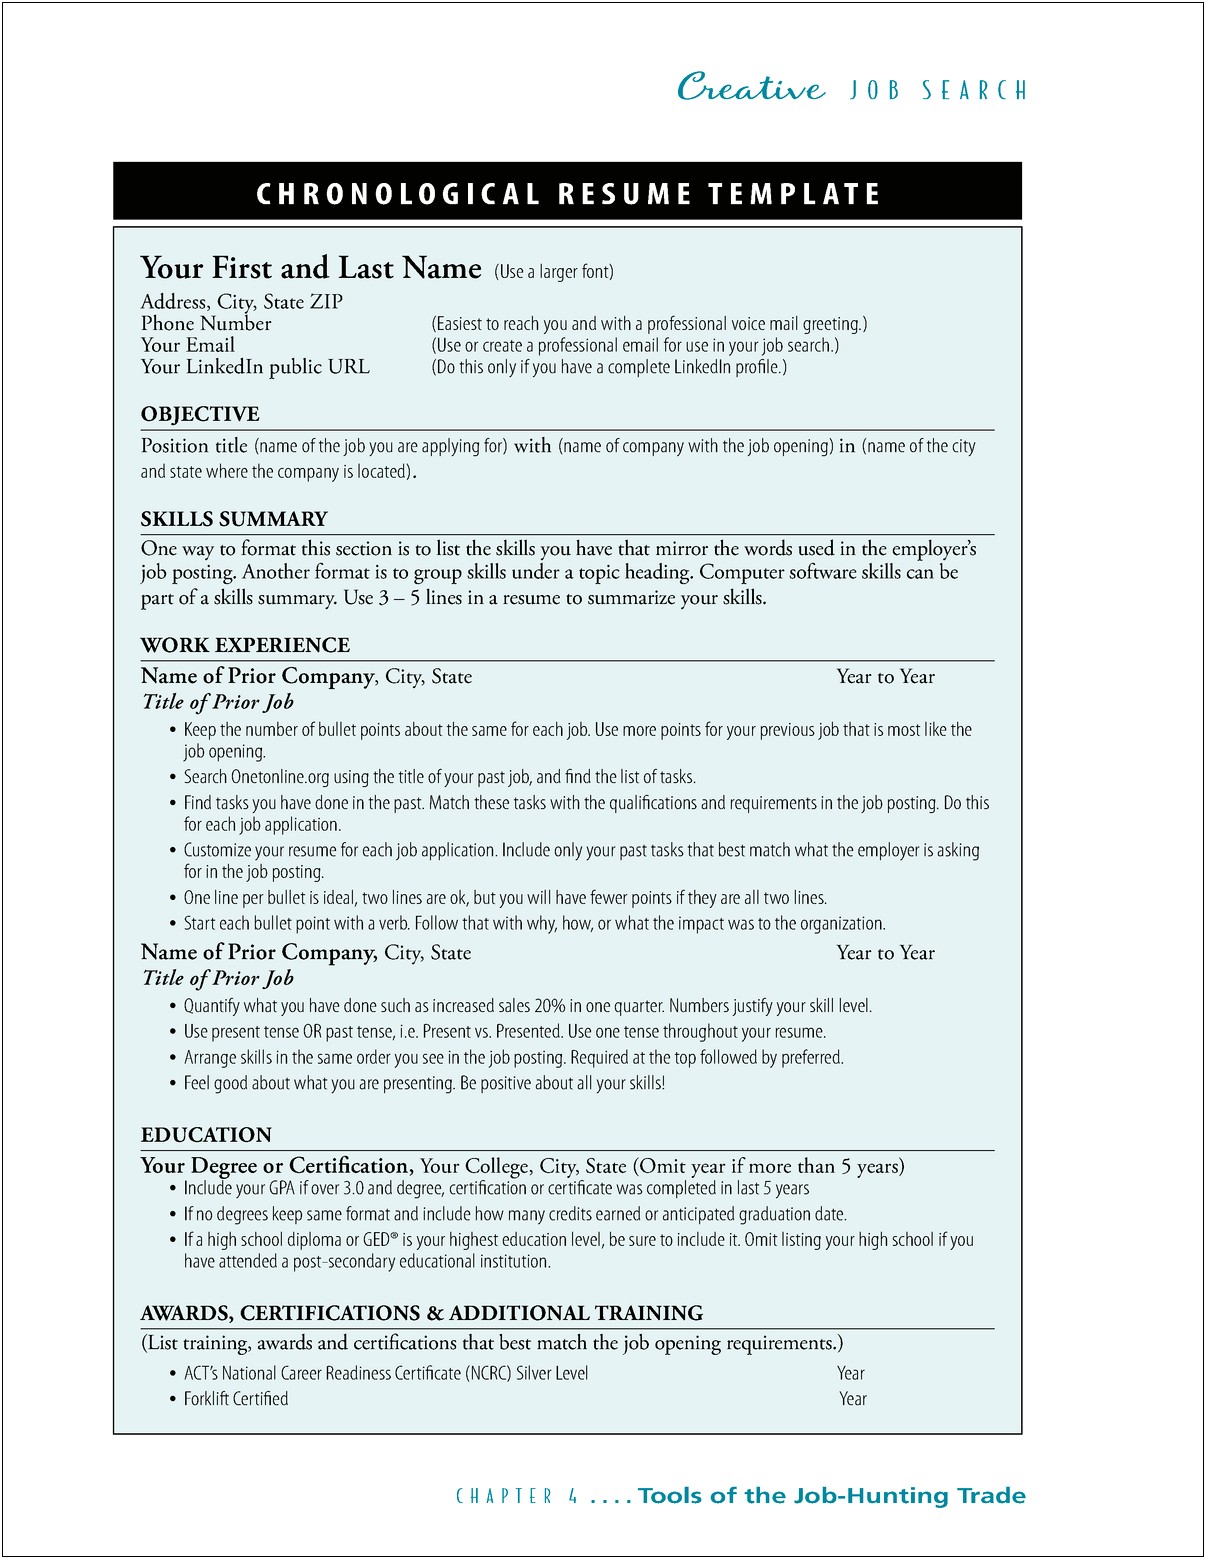 Match Qualifications And Skills To Job Resume Worksheet